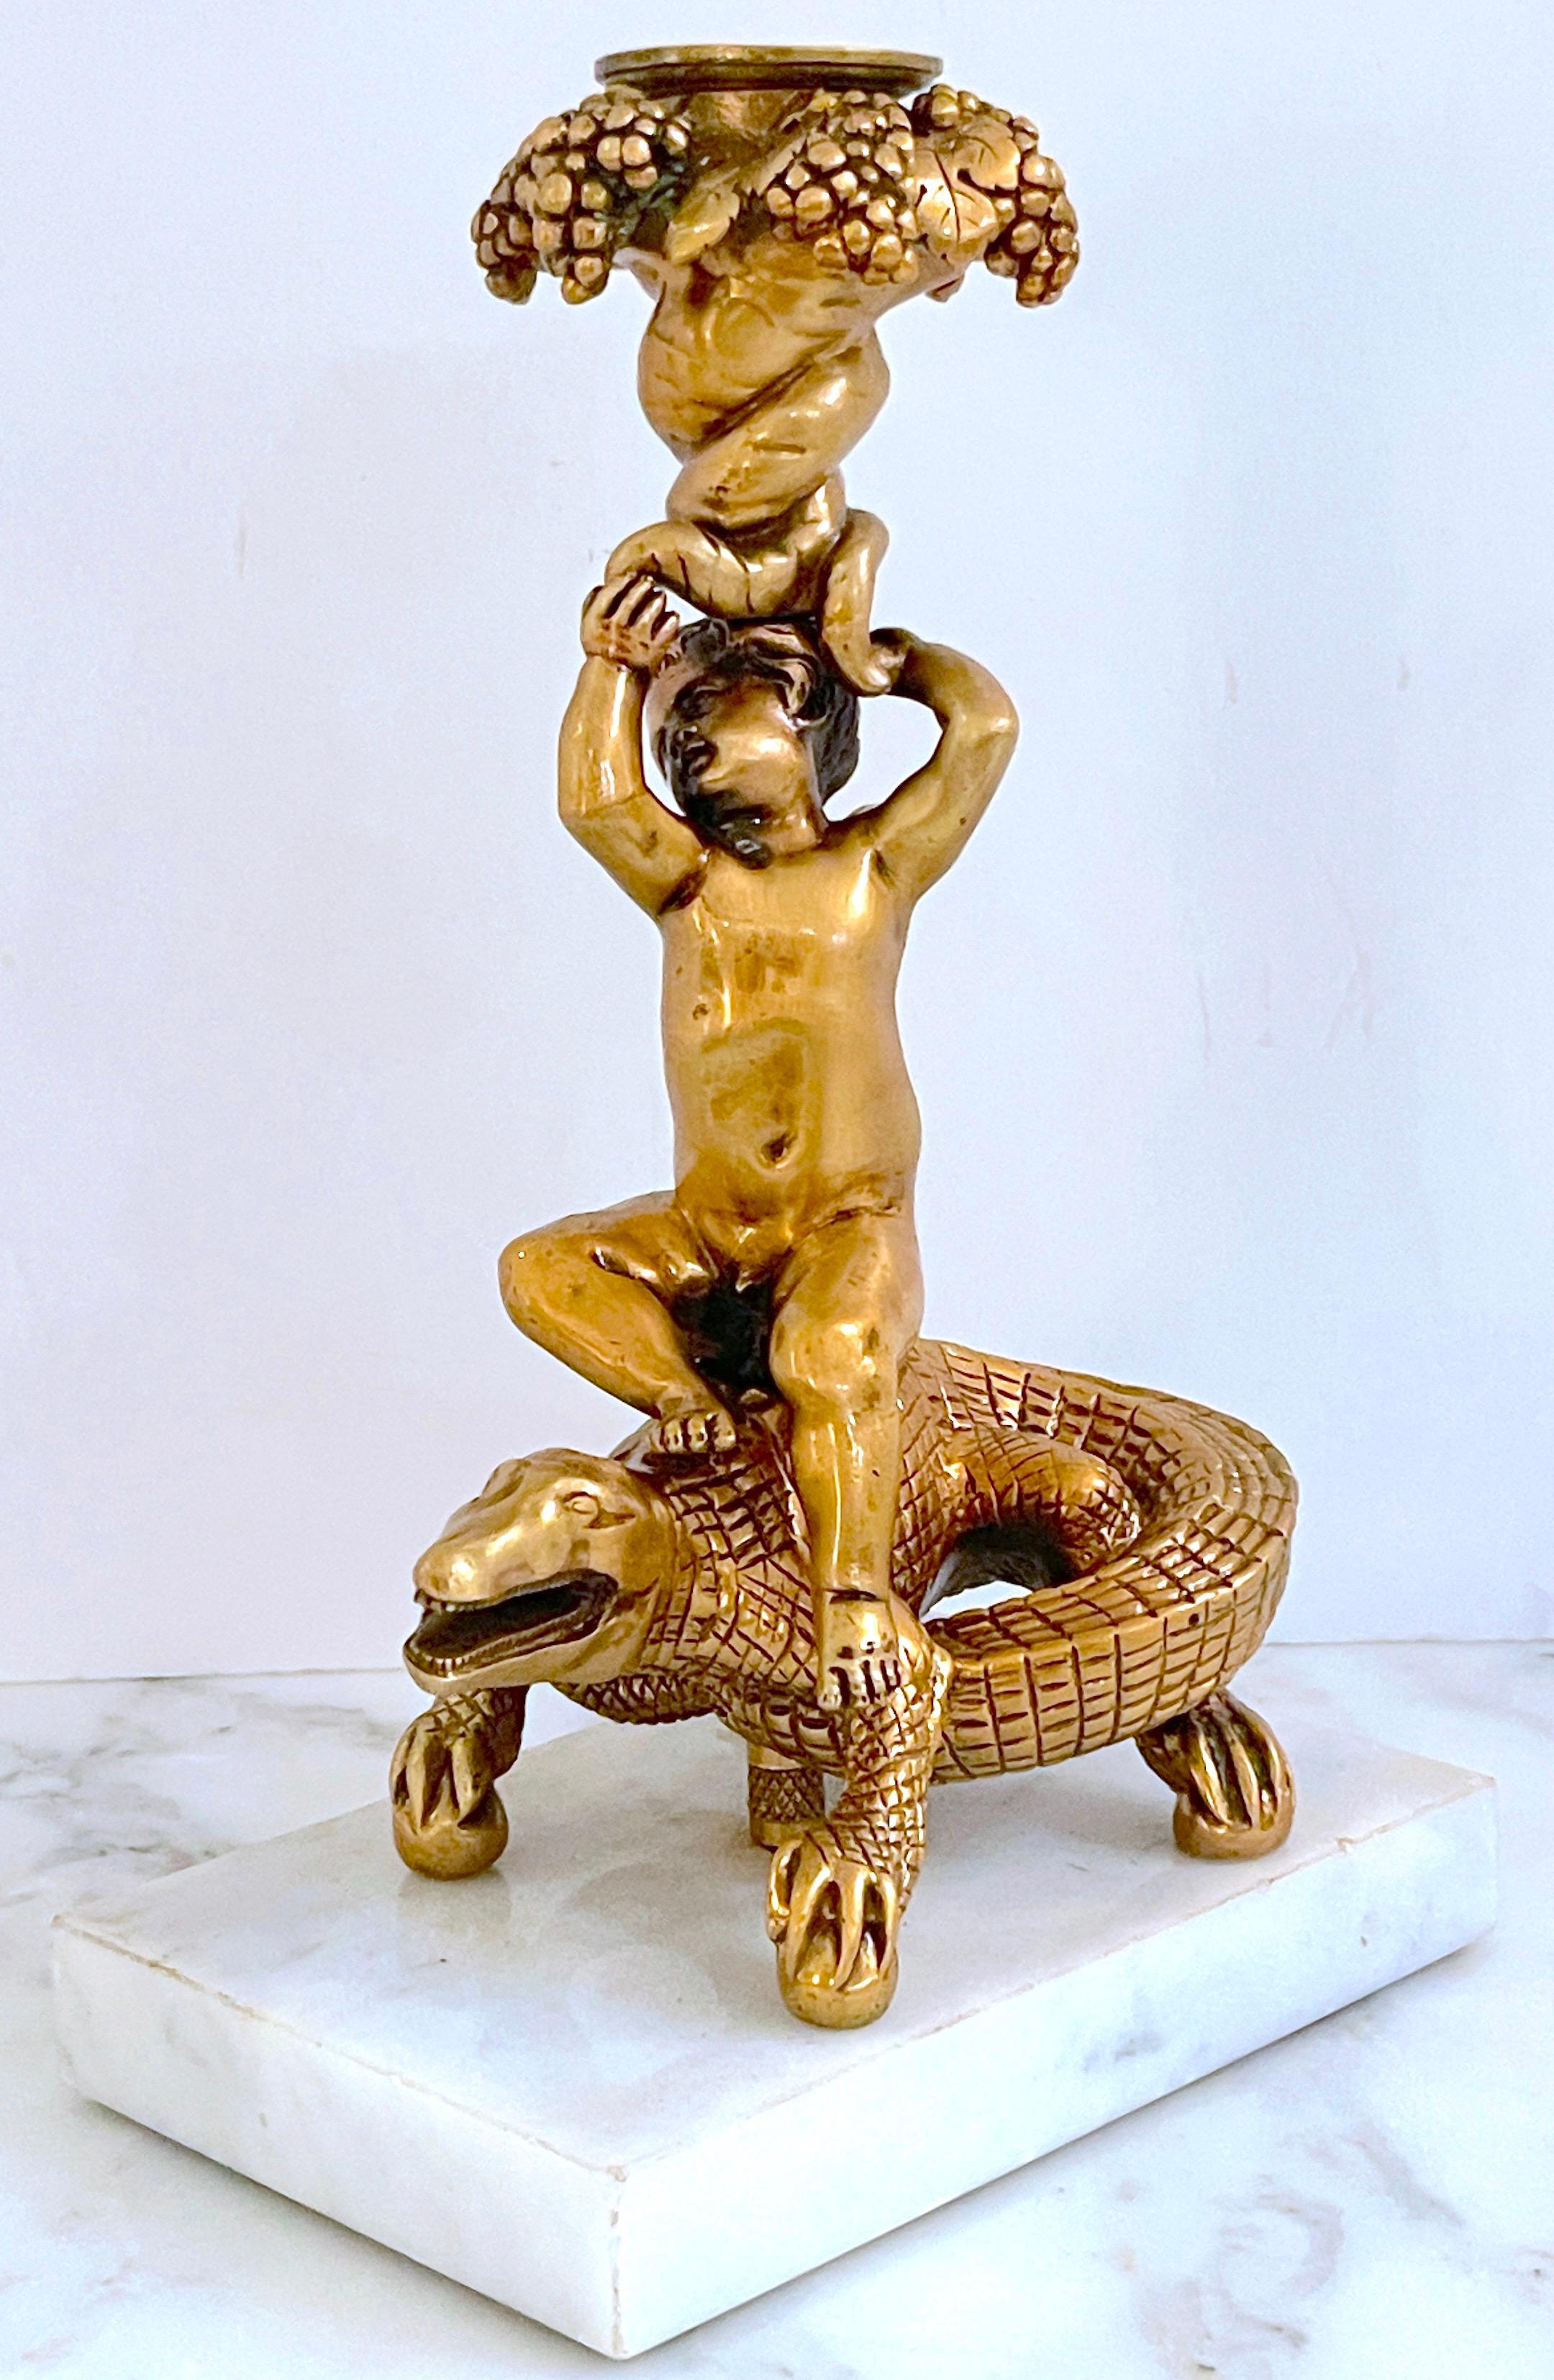 Italian Renaissance Style Gilt Bronze & Marble Putti on Crocodile Candlestick  
Italy, Late 19th Century 

Behold the elegance of this Italian Renaissance style gilt bronze & marble putti on crocodile candlestick from the late 19th century. Standing